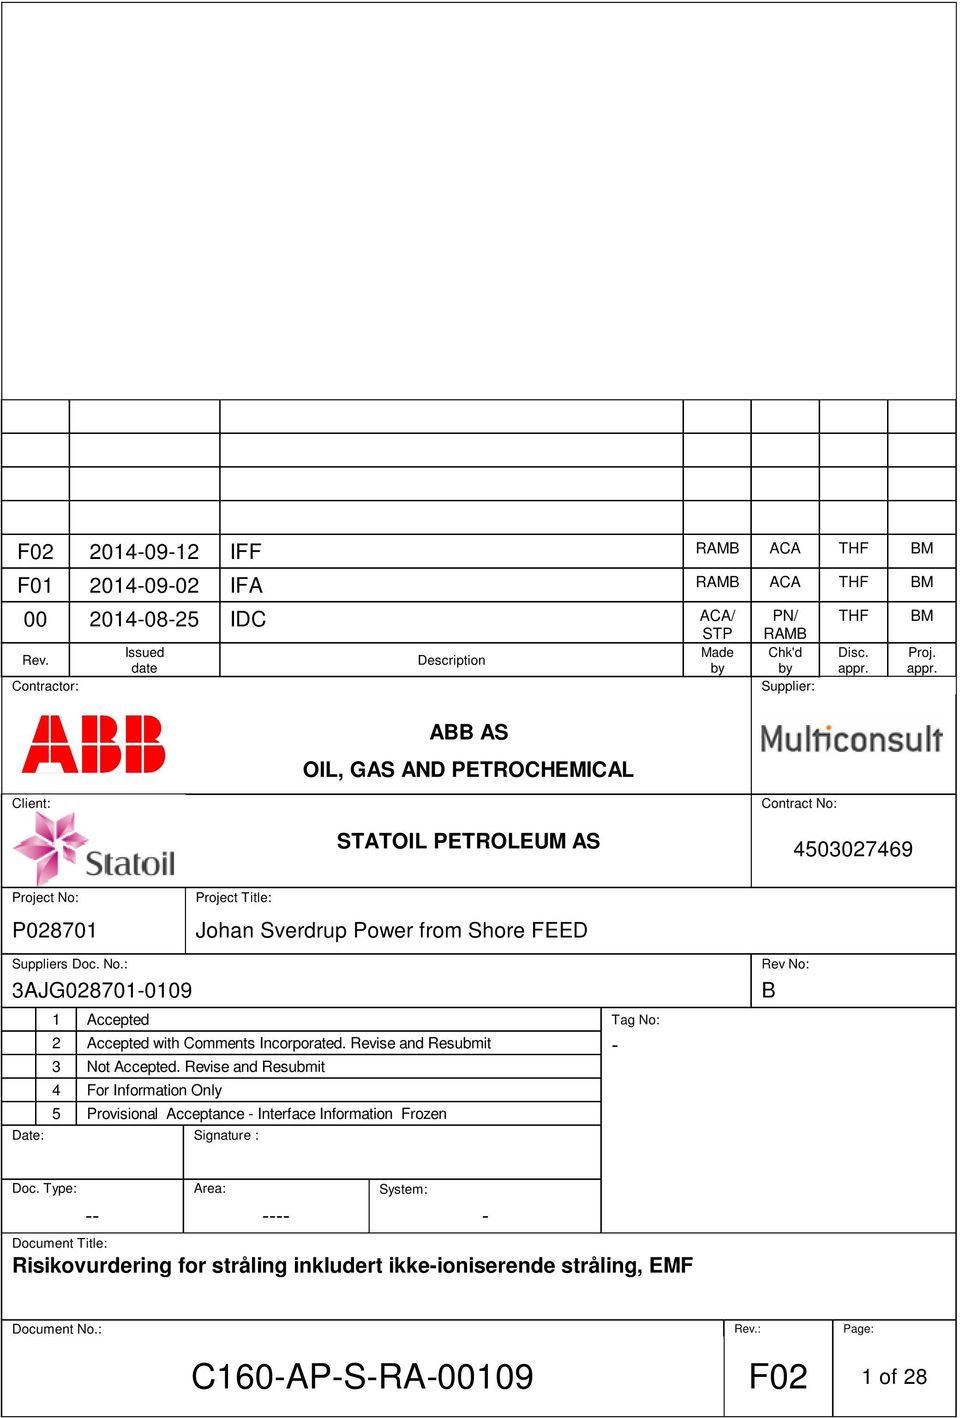 BM Proj. appr. Client: Contract No: STATOIL PETROLEUM AS 4503027469 Project No: P028701 Project Title: Johan Sverdrup Power from Shore FEED Suppliers Doc. No.: 3AJG028701-0109 1 Accepted Tag No: 2 Accepted with Comments Incorporated.